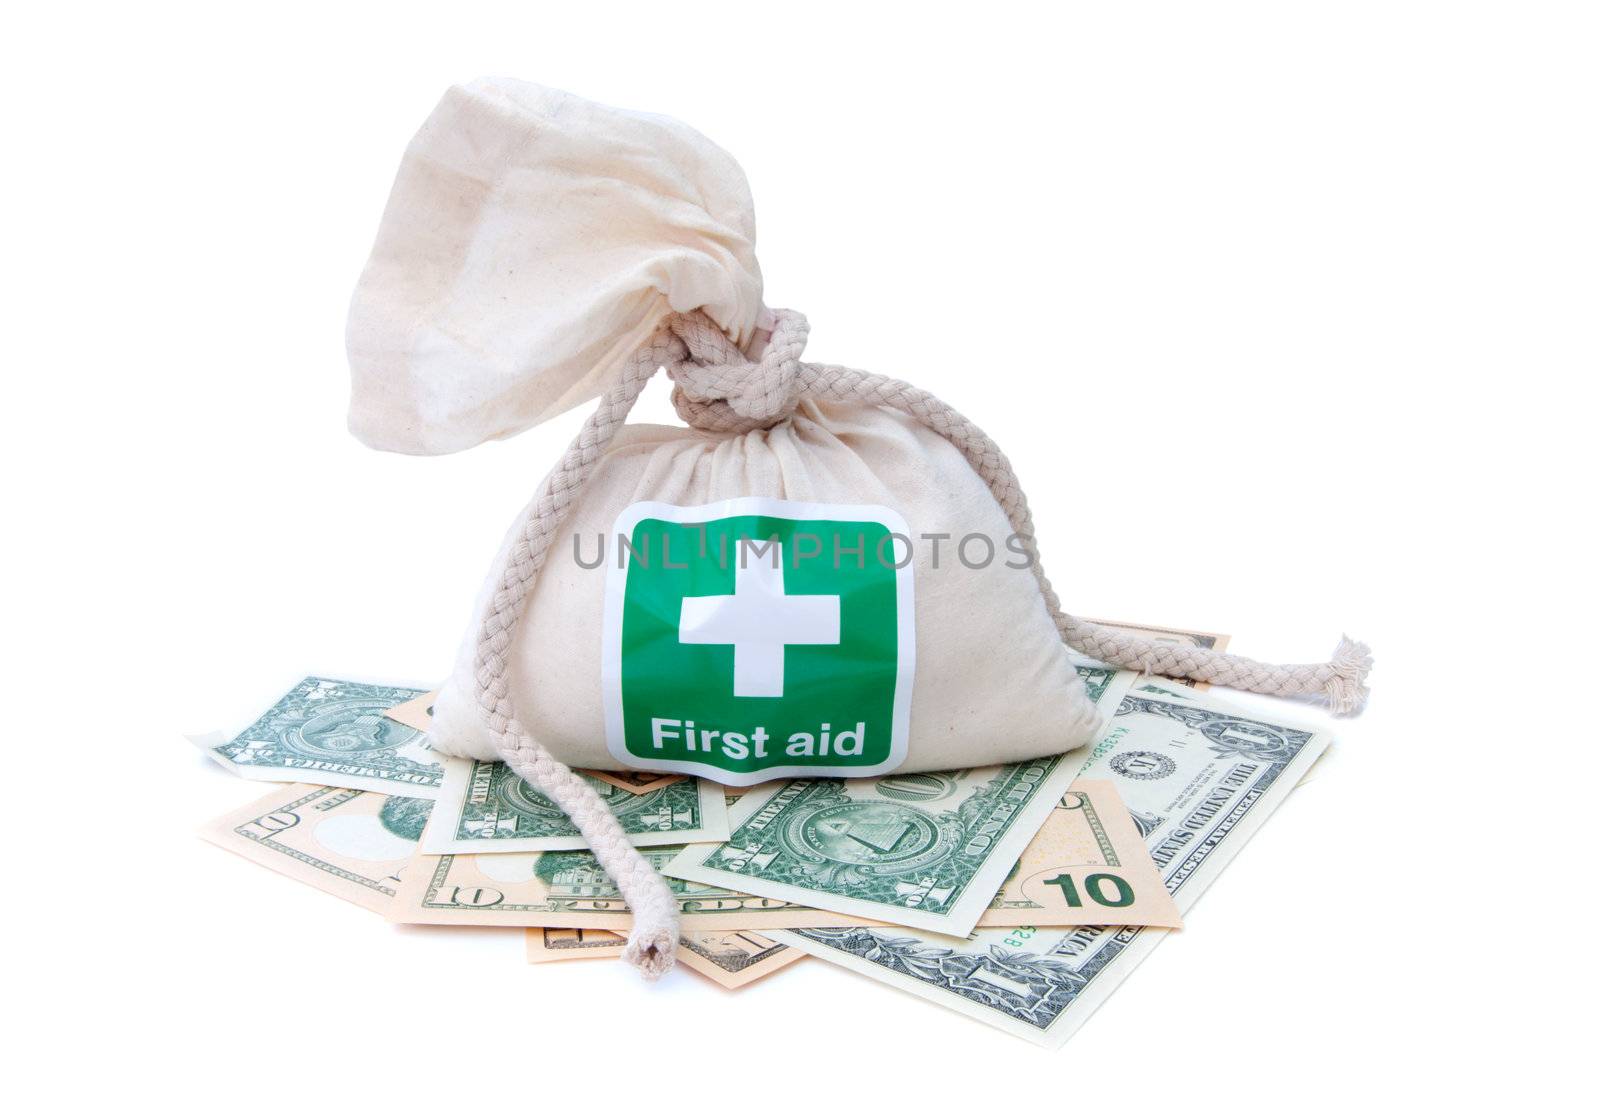 Sack full of money labeled with a first aid sticker 